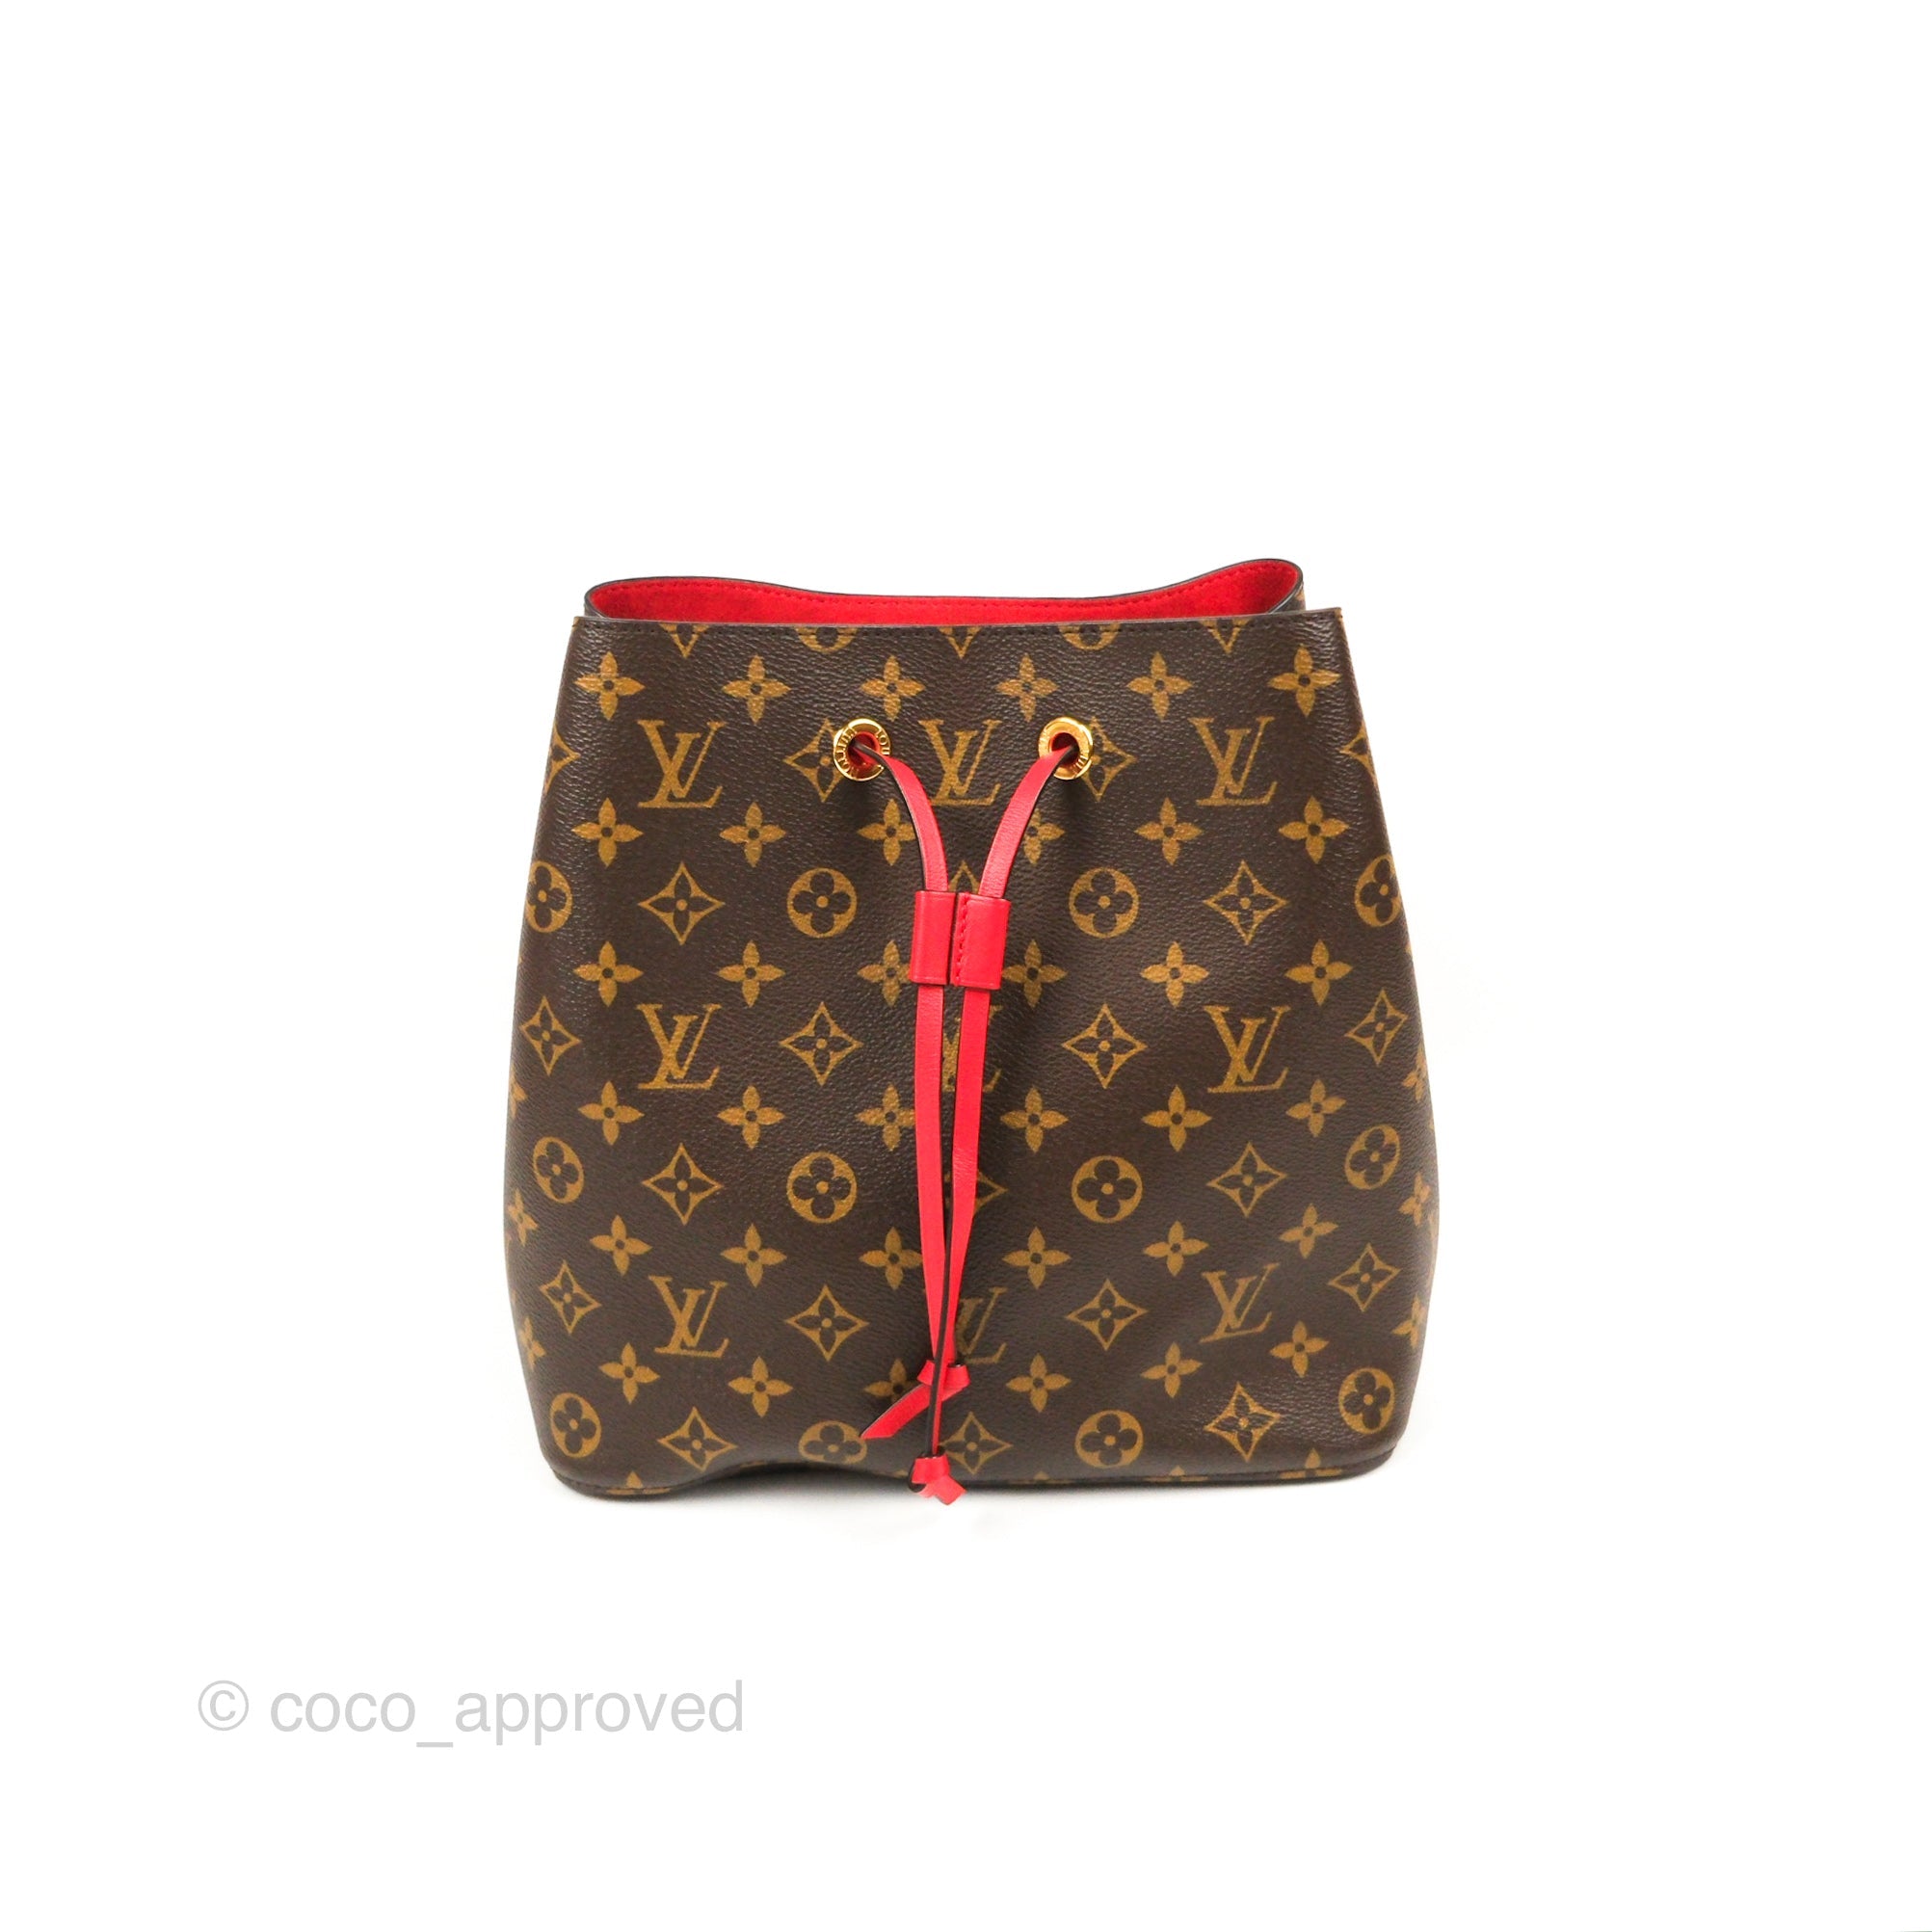 Louis Vuitton womens Damiere NoeNoe bucket bag with red Straps.